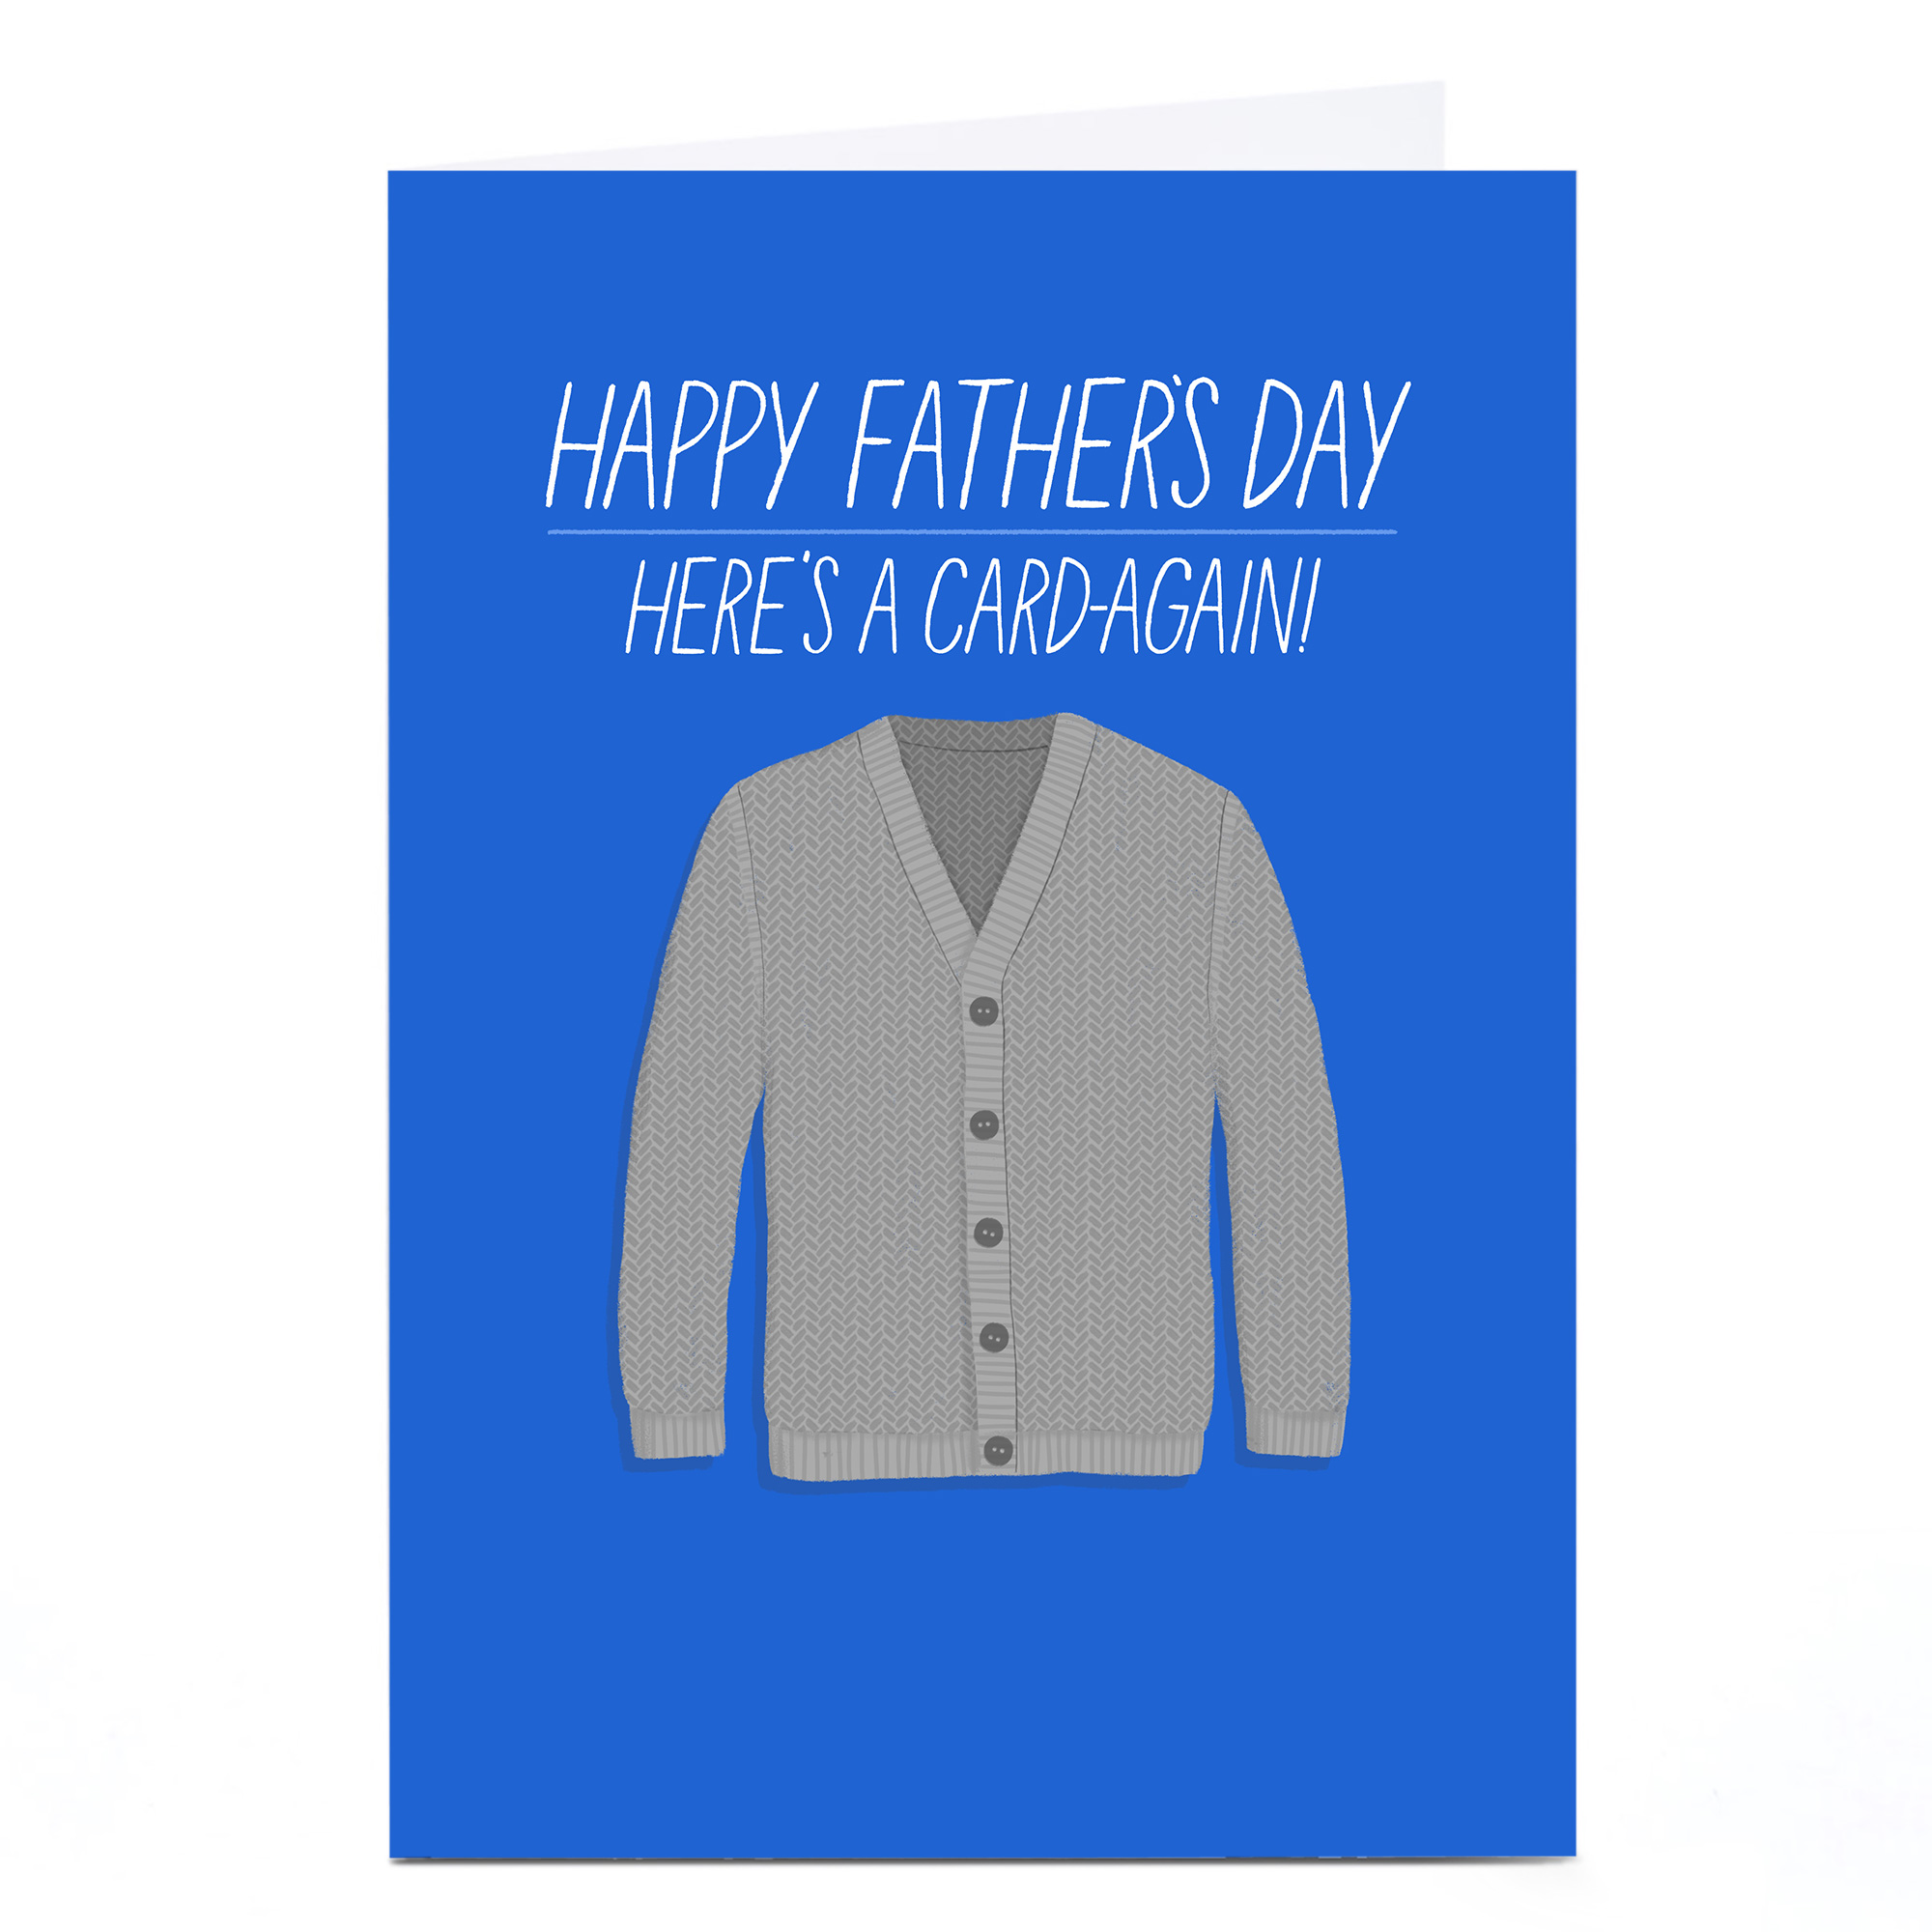 Personalised Father's Day Card - Here's A Card-Again